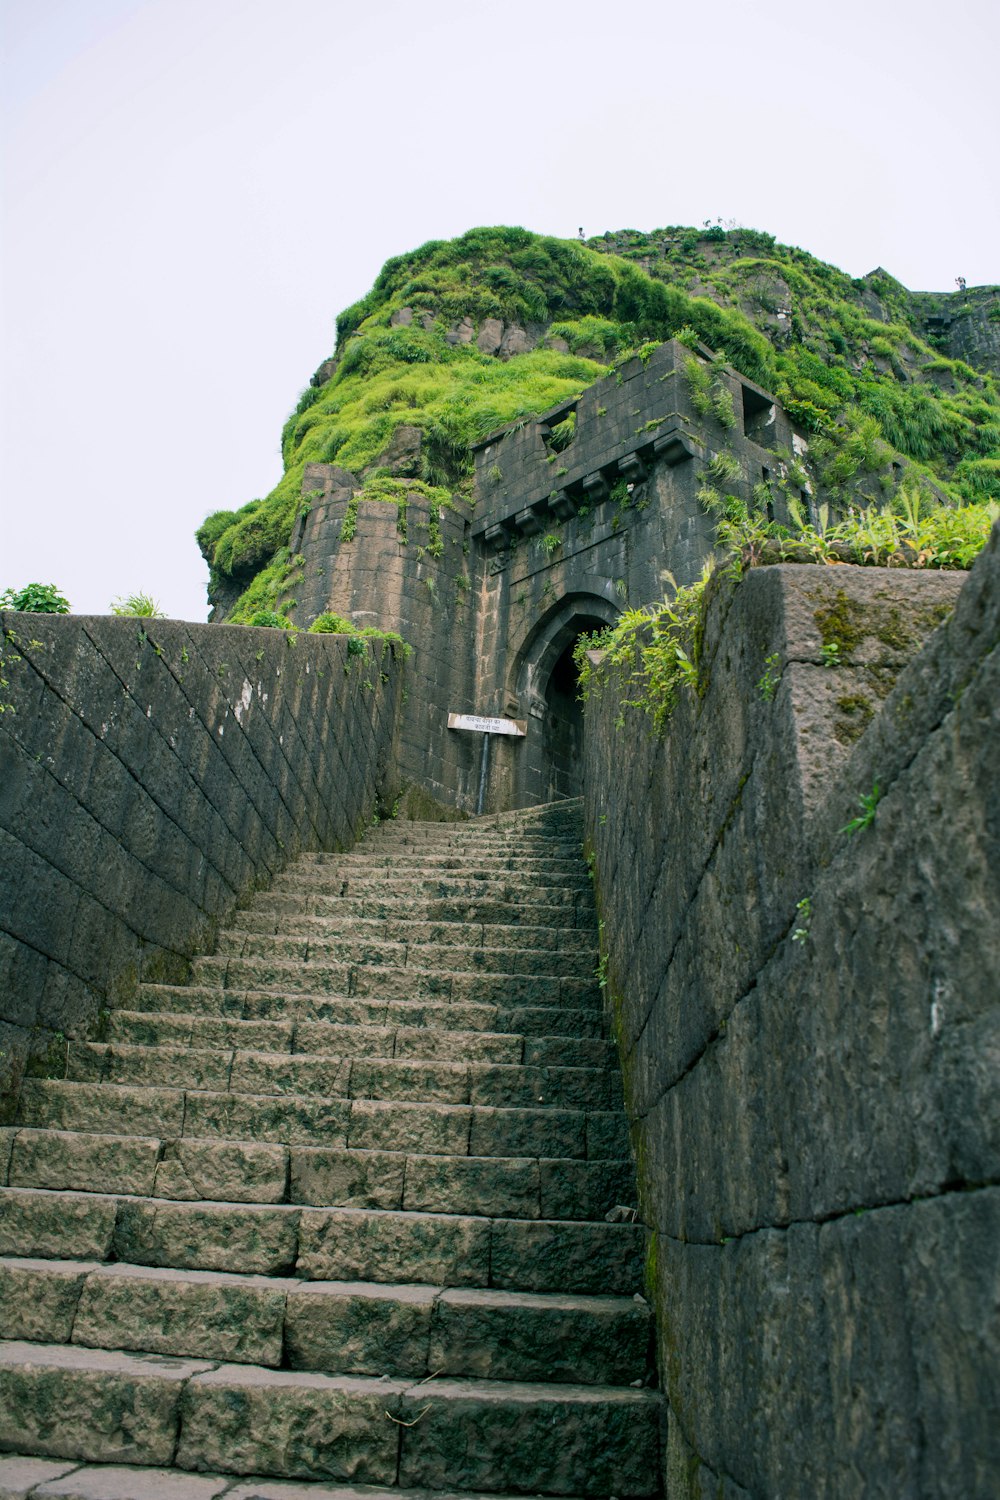 a stone staircase leading up to a hill with a stone wall